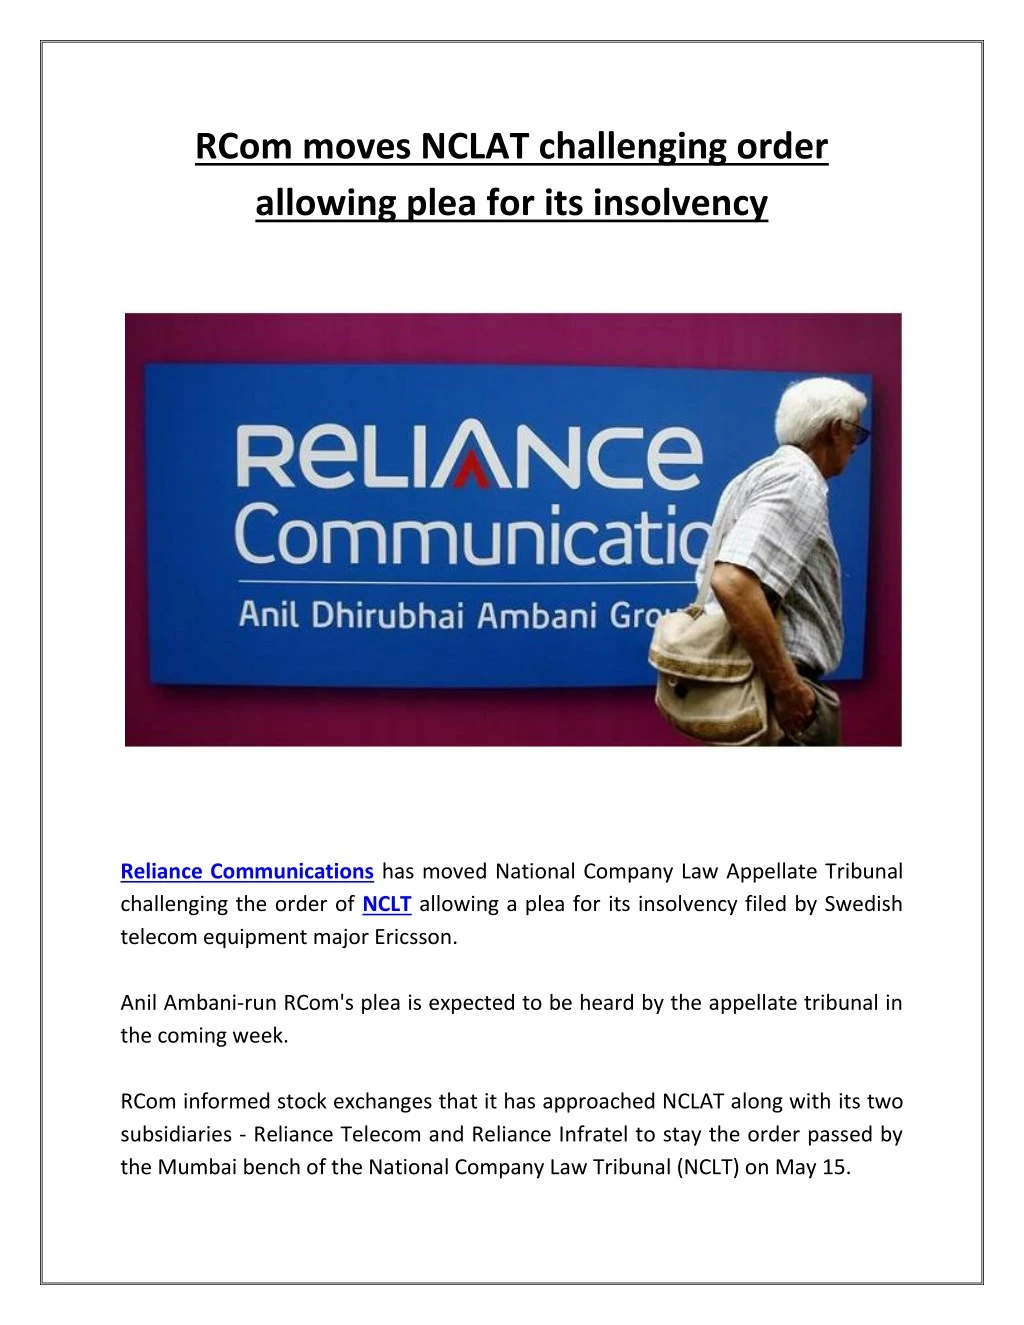 rcom moves nclat challenging order allowing plea